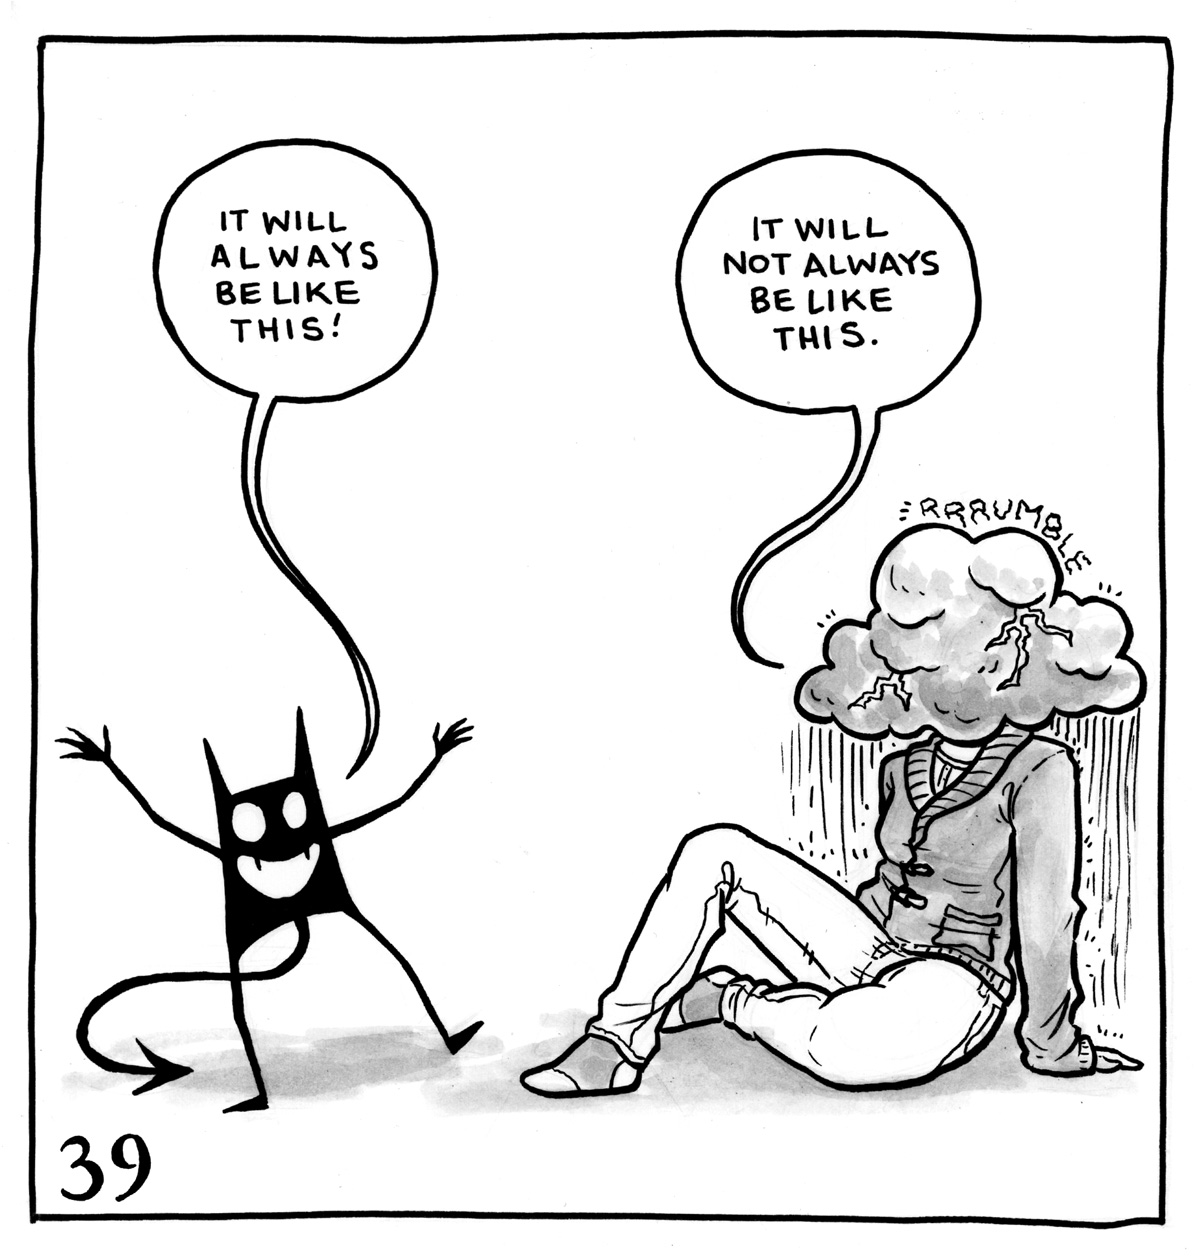 Black and white comic: The demon stands beside Lucy, whose head has become a large thundercloud complete with a raging thunderstorm. The demon says, "It will always be like this!" Lucy says, "It will not always be like this."